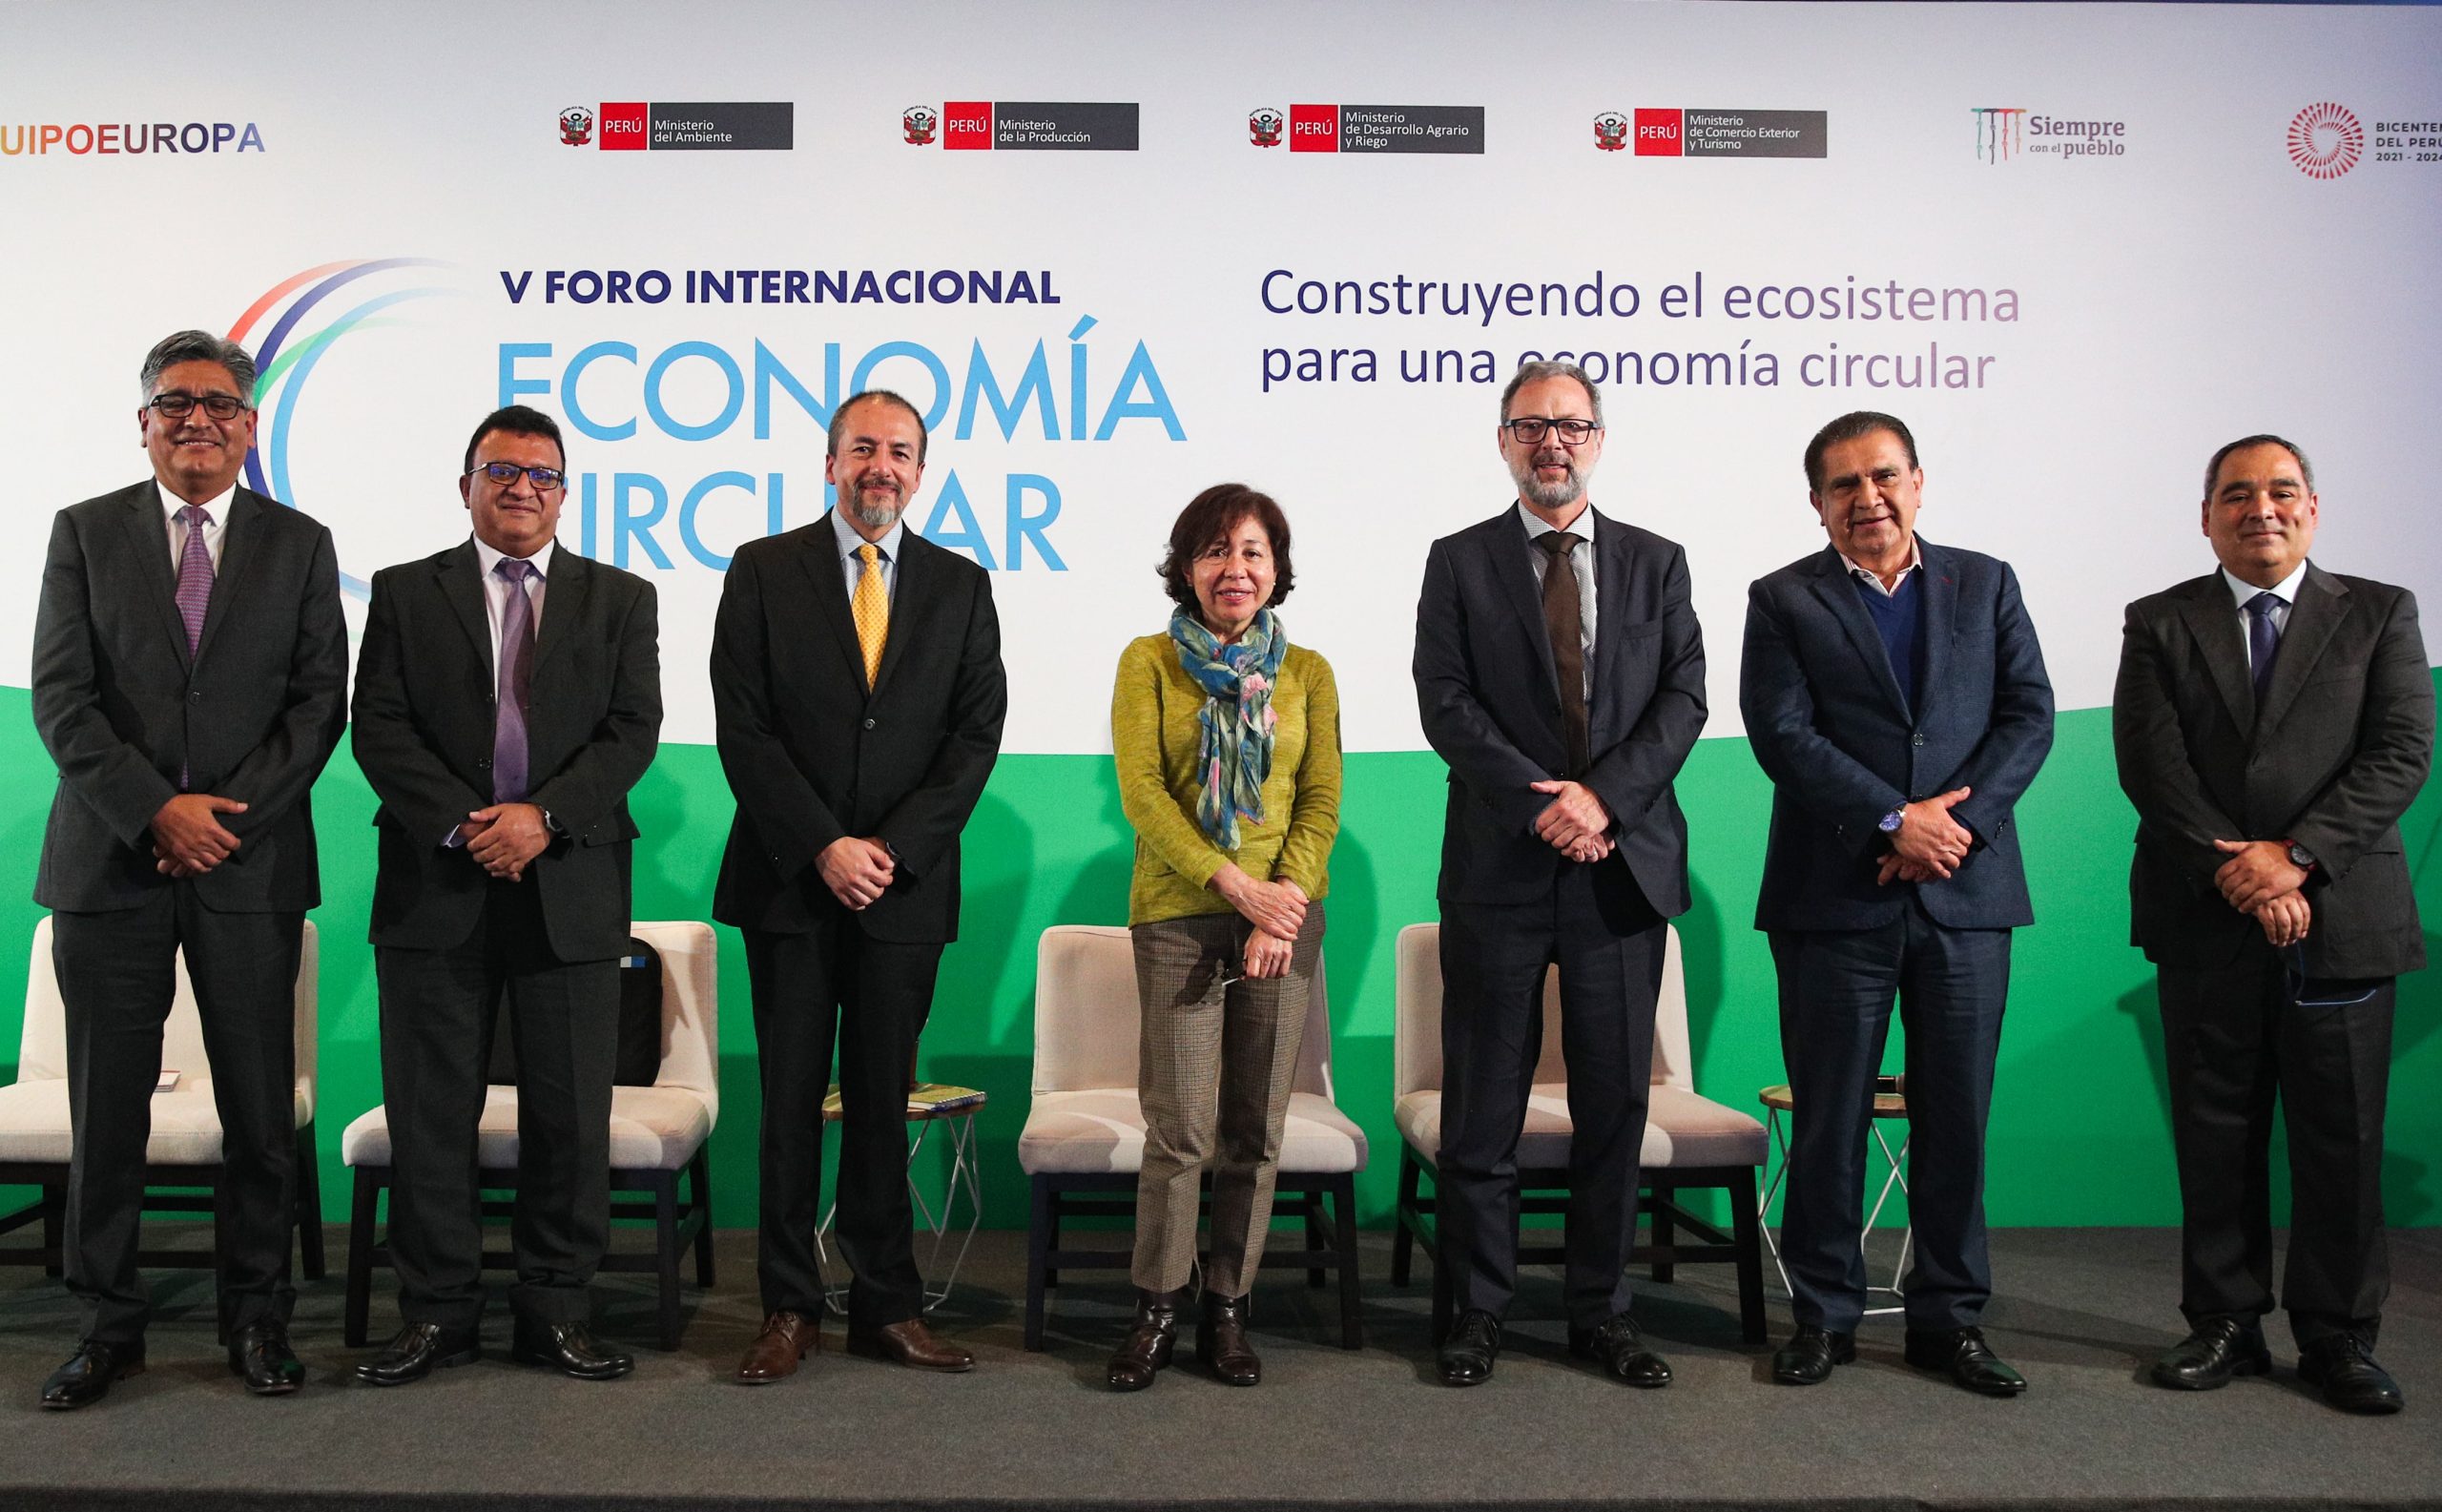 Luis Guillen, General Director of Environmental Affairs of Produce Industry, Ángel Paullo, Regional Manager of Economic Development of Cusco, Omar Cárdenas, Member of the Sustainability Commission of the Chamber of Commerce of Lima, Juana Kuramoto, Head of the Research and Development Office of Profonanpe, Robert Steinlechner, Head of Cooperation of the European Union in Peru, Manuel Leempén, Regional Governor of La Libertad and Edgardo Cruzado, Expert in management, decentralization and public policies.